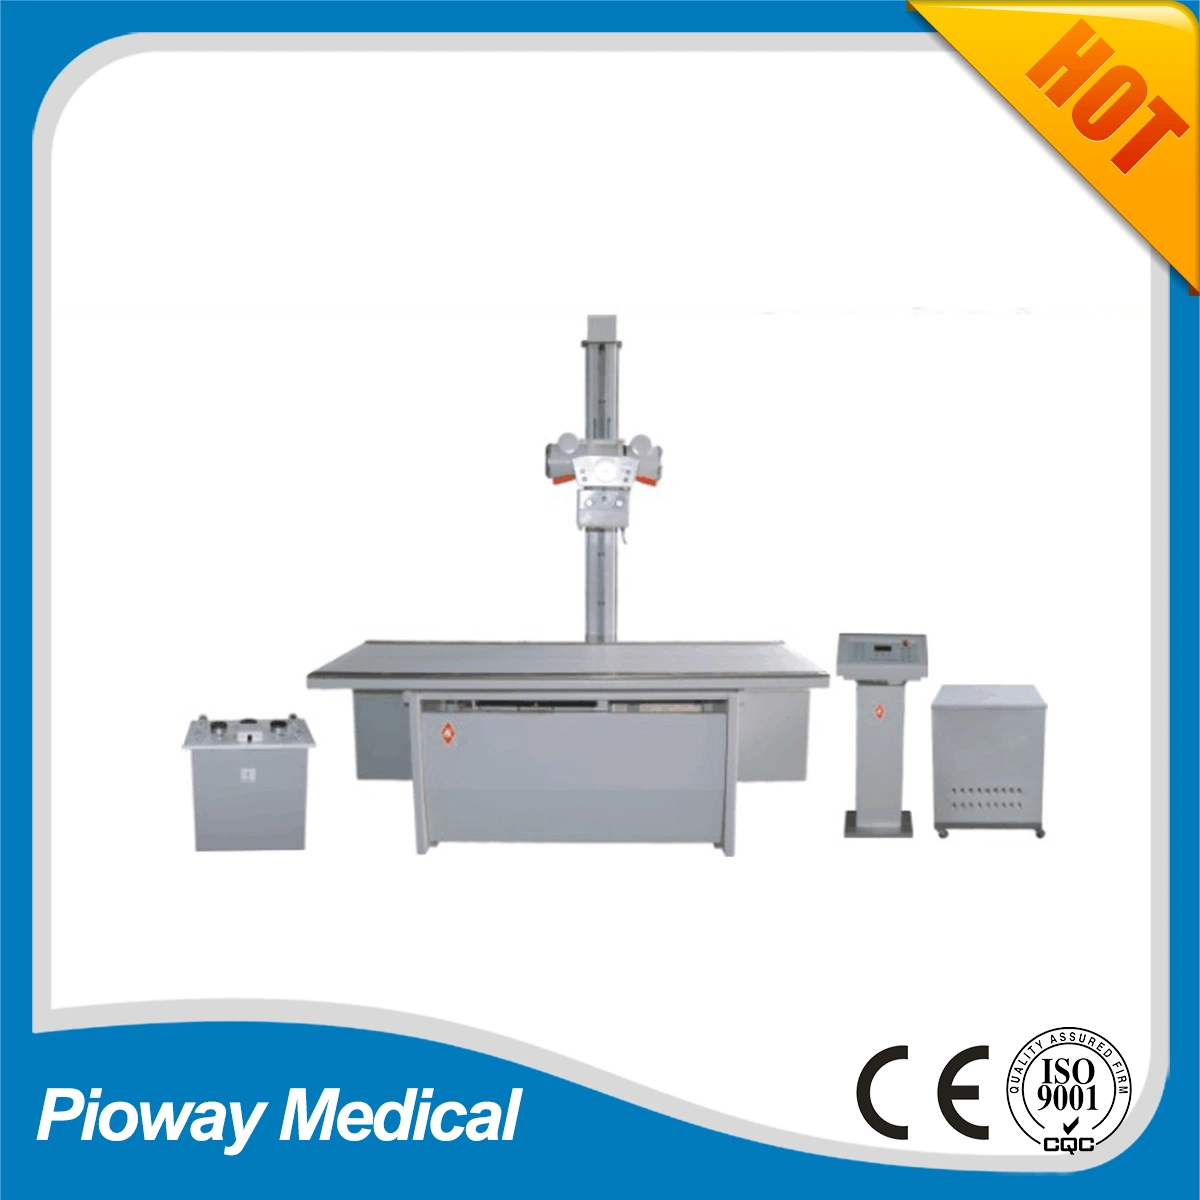 200mA Normal Frequency Floor Mounted X-ray Machine Sf200bz